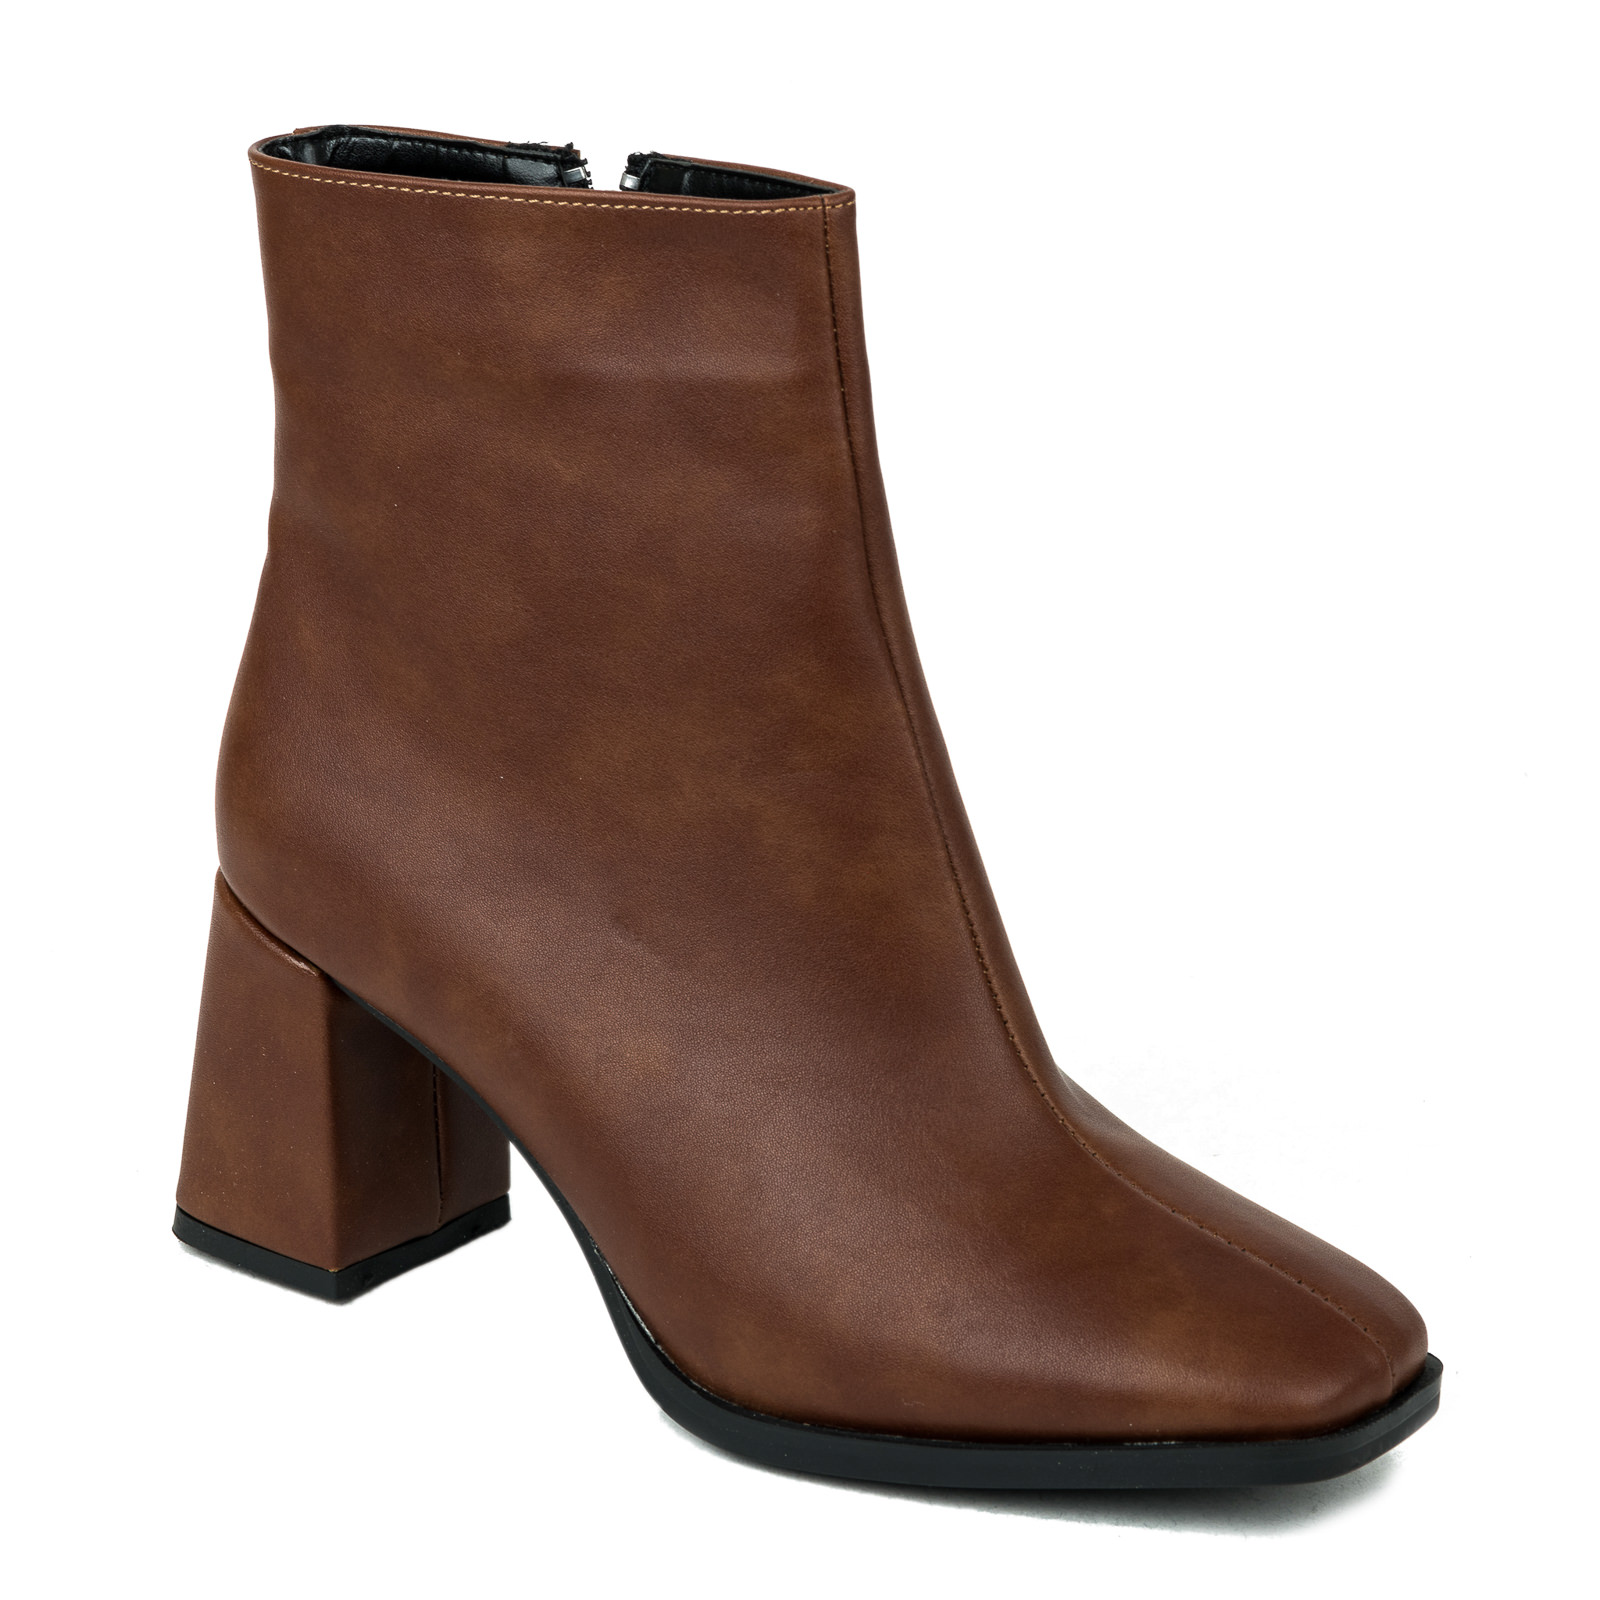 Women ankle boots B279 - CAMEL